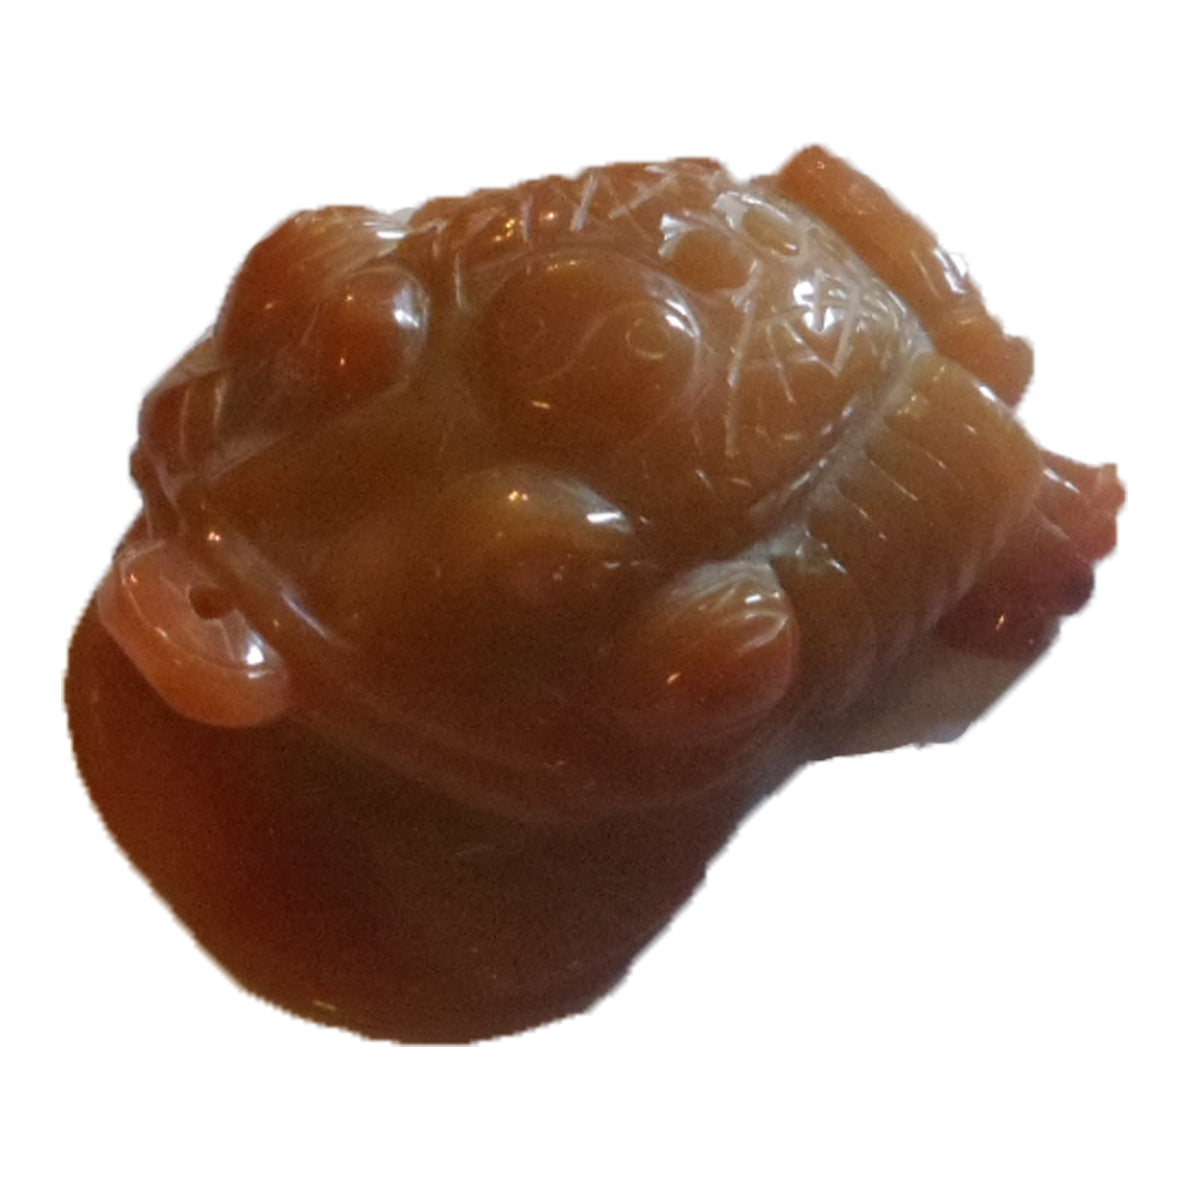 FIRE SALE! Feng Shui Money Frog Figurine Statue Brown Agate Gemstone 3 In L Home Decor